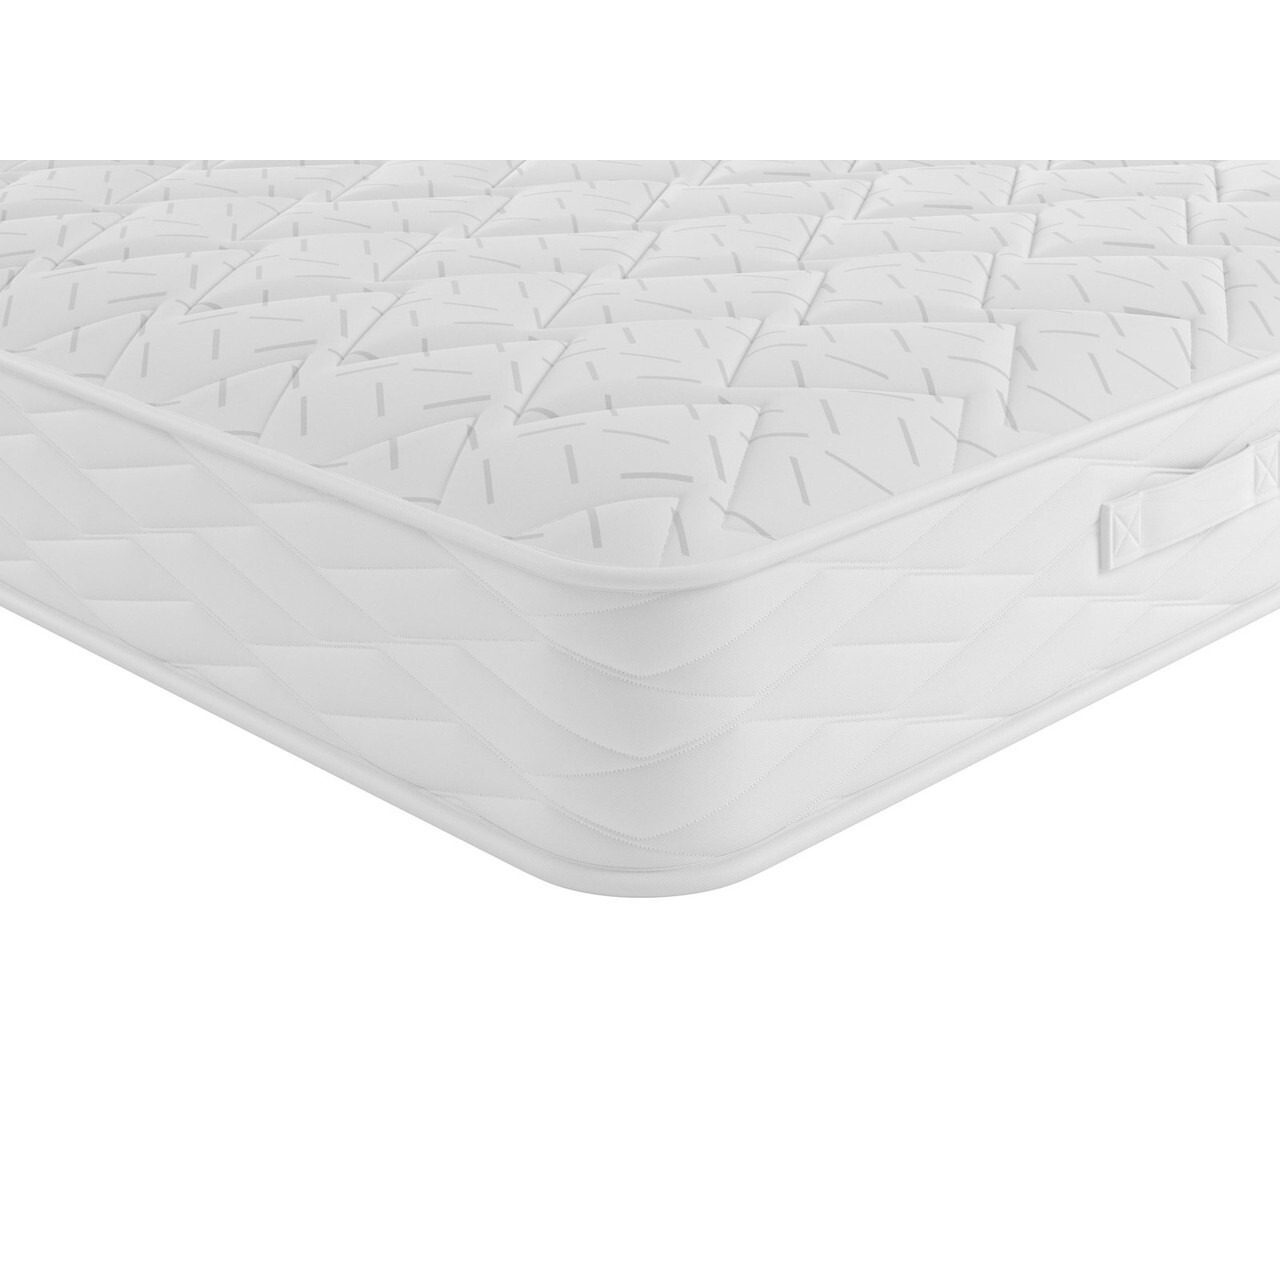 Simply By Bensons Bliss Mattress - image 1